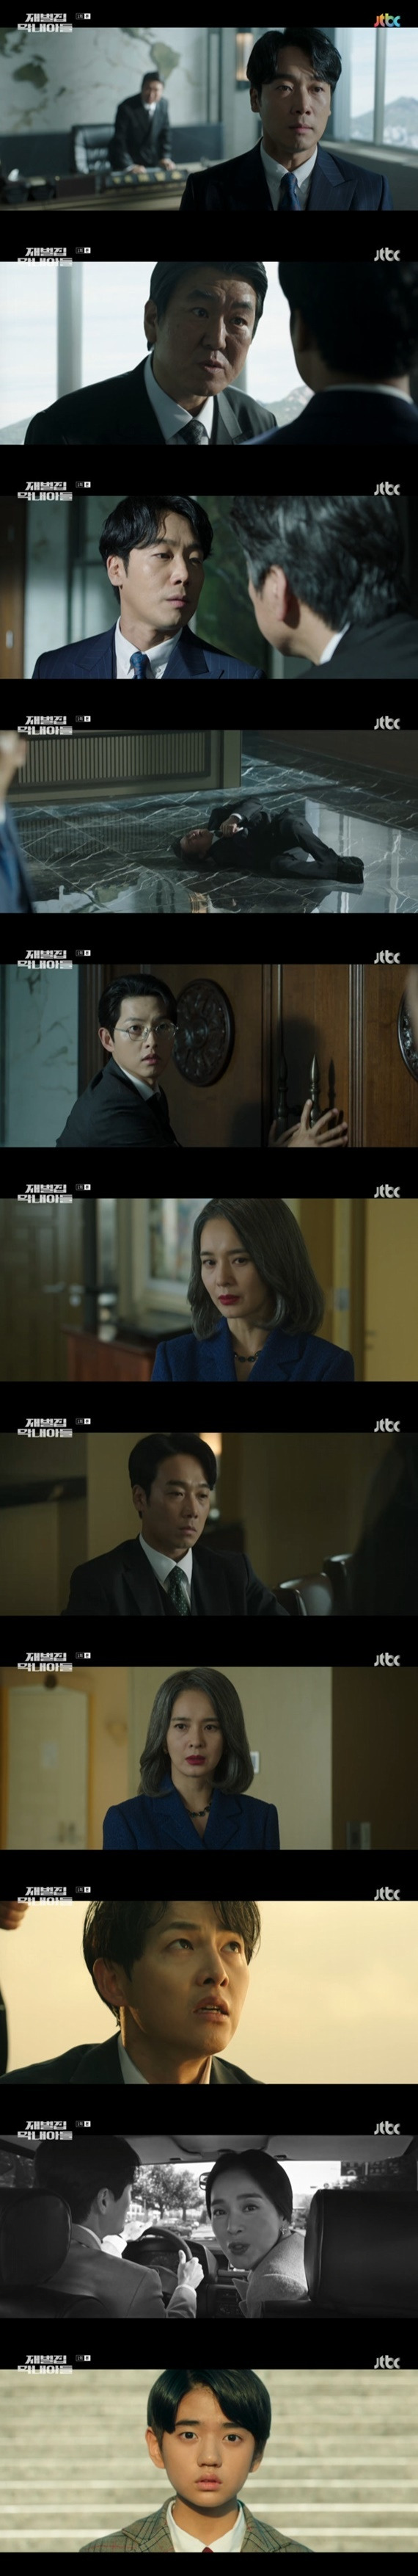 Seoul =) = The Youngest Son of a Conglomerate Kim Nam-hee and Jung Hye-youngs questioning thoughts raised questions.JTBCs new Friday-Saturday drama The Youngest Son of a Conglomerate (playwright Kim Tae-hee Jang Eun-jae/director Jeong Dae-yoon Kim Sang-ho), which aired in the afternoon of the 18th, featured the secret Sunyang group owners family.Ahead of the unveiling ceremony of the bust of Sunyang Groups former chairman Jin Yang-chul (Lee Sung-min) and the announcement of Sunyangs special statement to the public, the anxious vice-chairman JIN SUNGJOON (Kim Nam-hee) drew attention.JIN SUNGJOON visited the chairman Jinyoung (Yoon Jae-moon) and declared, Succession, my father will not be able to do it, because I will give up inheritance.In addition, JIN SUNGJOON shouted, Do you think I will never know that day? Its over now.Jinyoung said, What do you give up a guy who has never earned a 10 won with my hand?Everything you enjoy, Grandpa and I, this cruiser made, pride is a luxury that can be thrown away by anyone who can throw away everything. I was angry that I did my best for son JIN SUNGJOON.But JIN SUNGJOON said, In the most cruel way, he tightened my breath, he informed me like a father that I did not deserve it, with that choice.In the end, Jinyoung collapsed due to difficulty in breathing, and Yoon Hyeon-woo (Song Joong-ki), who came to the presidential office, found Jinyoung and settled it.However, JIN SUNGJOON left the chairmans office in a hurry even after the Jinyoung collapsed.Since then, Party Crasher, the wife of Jin Yoon-ki (played by Kim Young-jae), and Lee Hae-in (played by Jung Hye-young), who are not welcomed by all the owners family, have appeared in Sunyang.Lee Hae-in declared that if you reveal the truth of the accident, My son, I need to know the truth of the accident that day, you know, bring me the answer!Meanwhile, Yoon Hyeon-woo, who was loyal to Sunyang, was killed while searching for Sunyangs assets hidden abroad.At the moment of his death, Yoon Hyeon-woo raised tension by opening his eyes with the appearance of Jin Yoon-ki, Lee Hae-ins second son, and young Jin Do-joon (Kim Kang Hoon).JTBC Gilt Drama The Youngest Son of a Conglomerate is a fantasy drama in which the secretary who manages the owners risk of the Conglomerate family returns to The Youngest Son of a Conglomerate family and lives the second time in his life. It is broadcast every Friday, Saturday and Sunday at 10:30 pm.